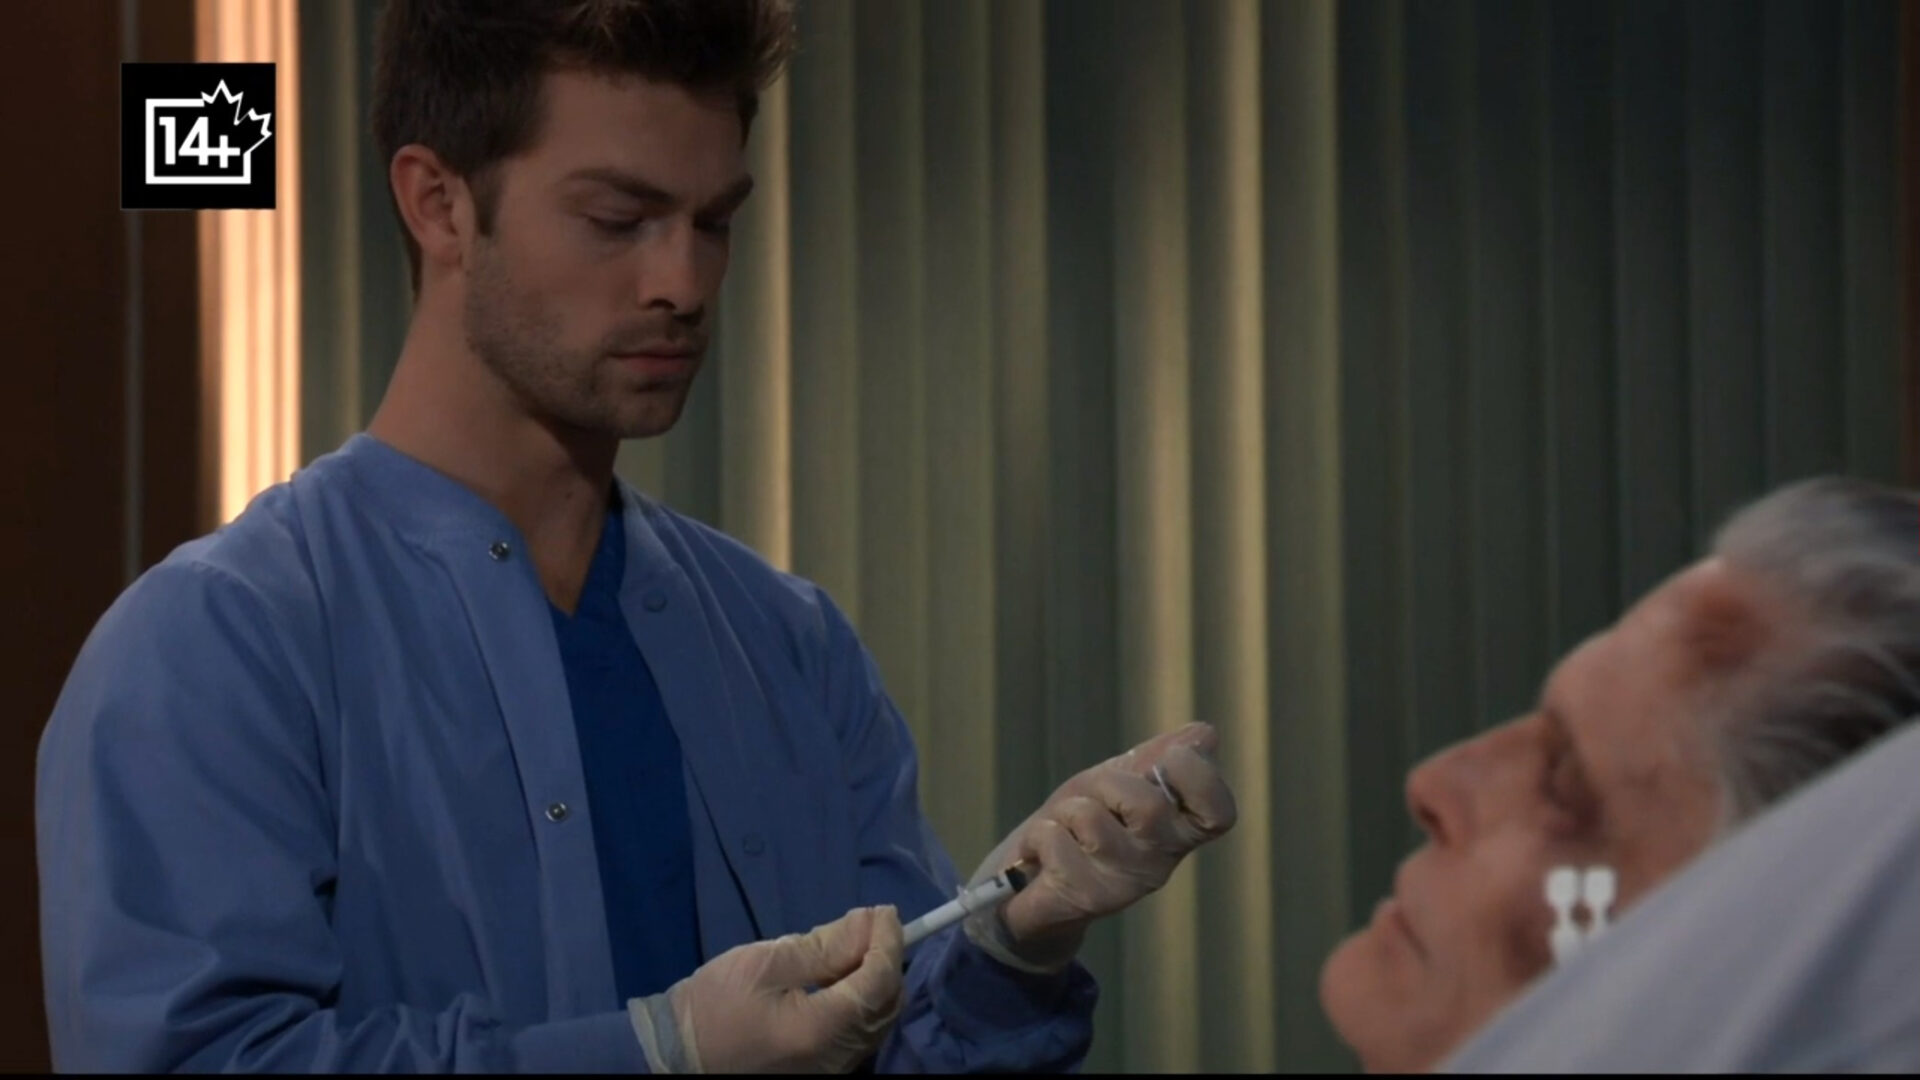 dex injecting cyrus on GH